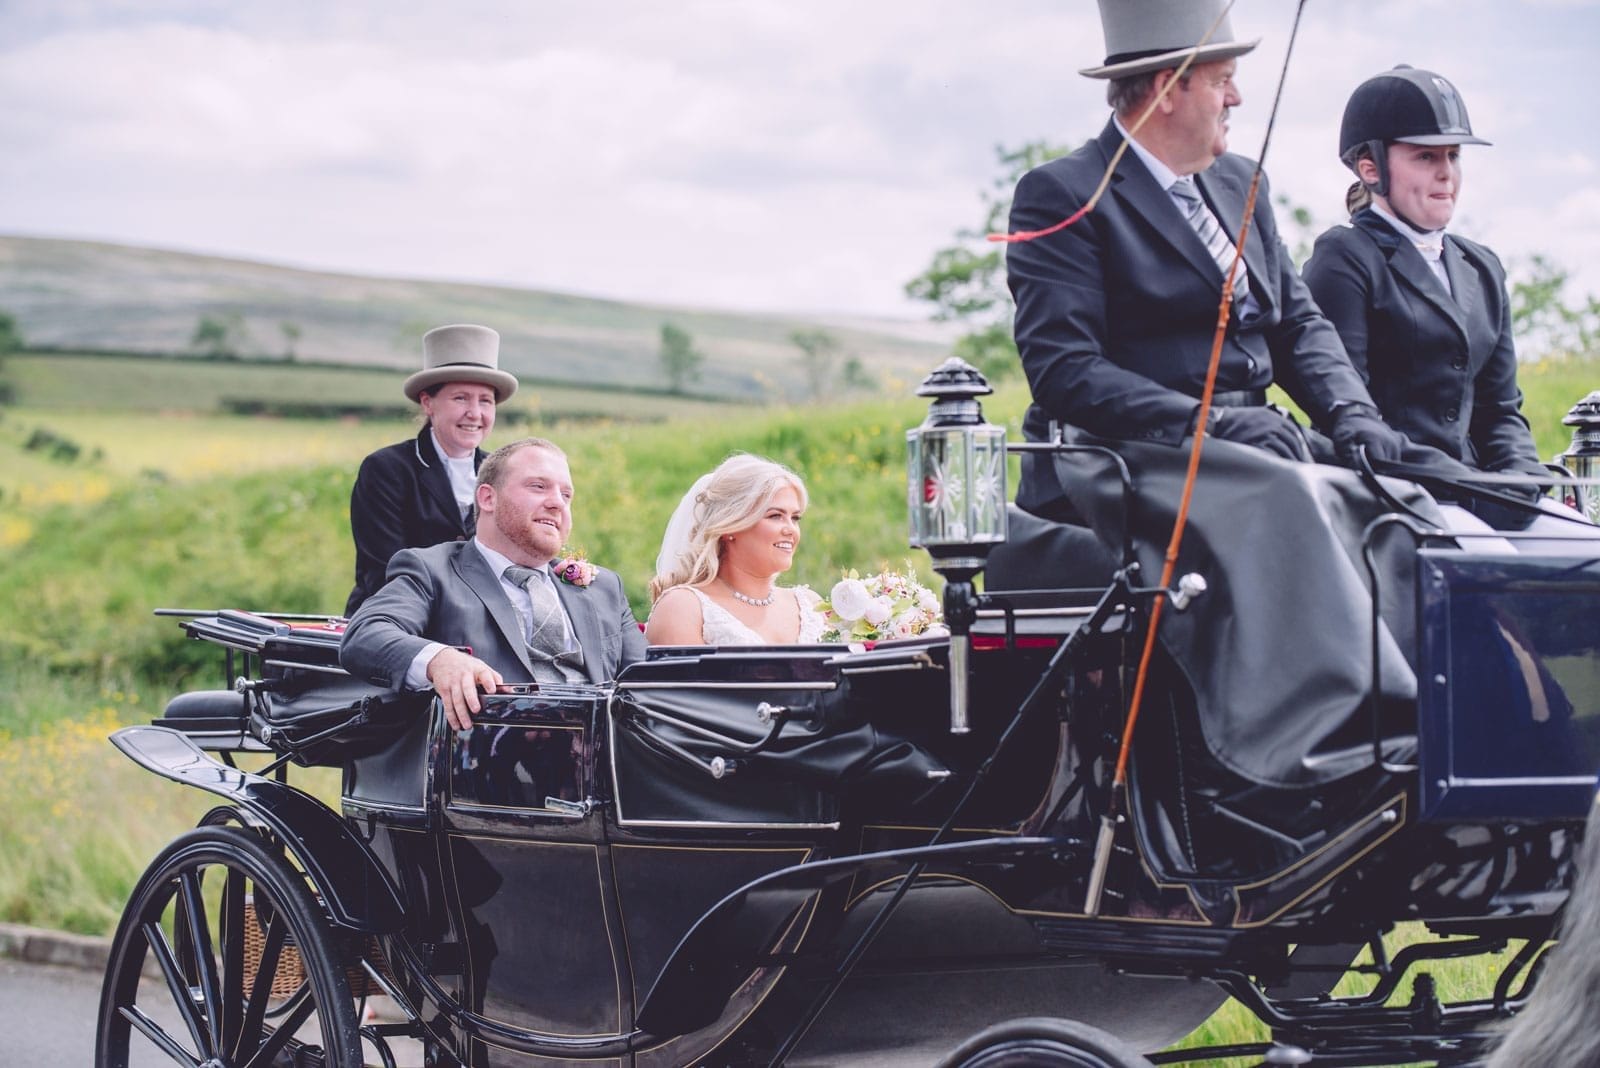 A couple in wedding attire sit in a horse-drawn carriage, captured beautifully by a wedding photographer with coachmen in top hats and a rural background. northern ireland wedding photographer